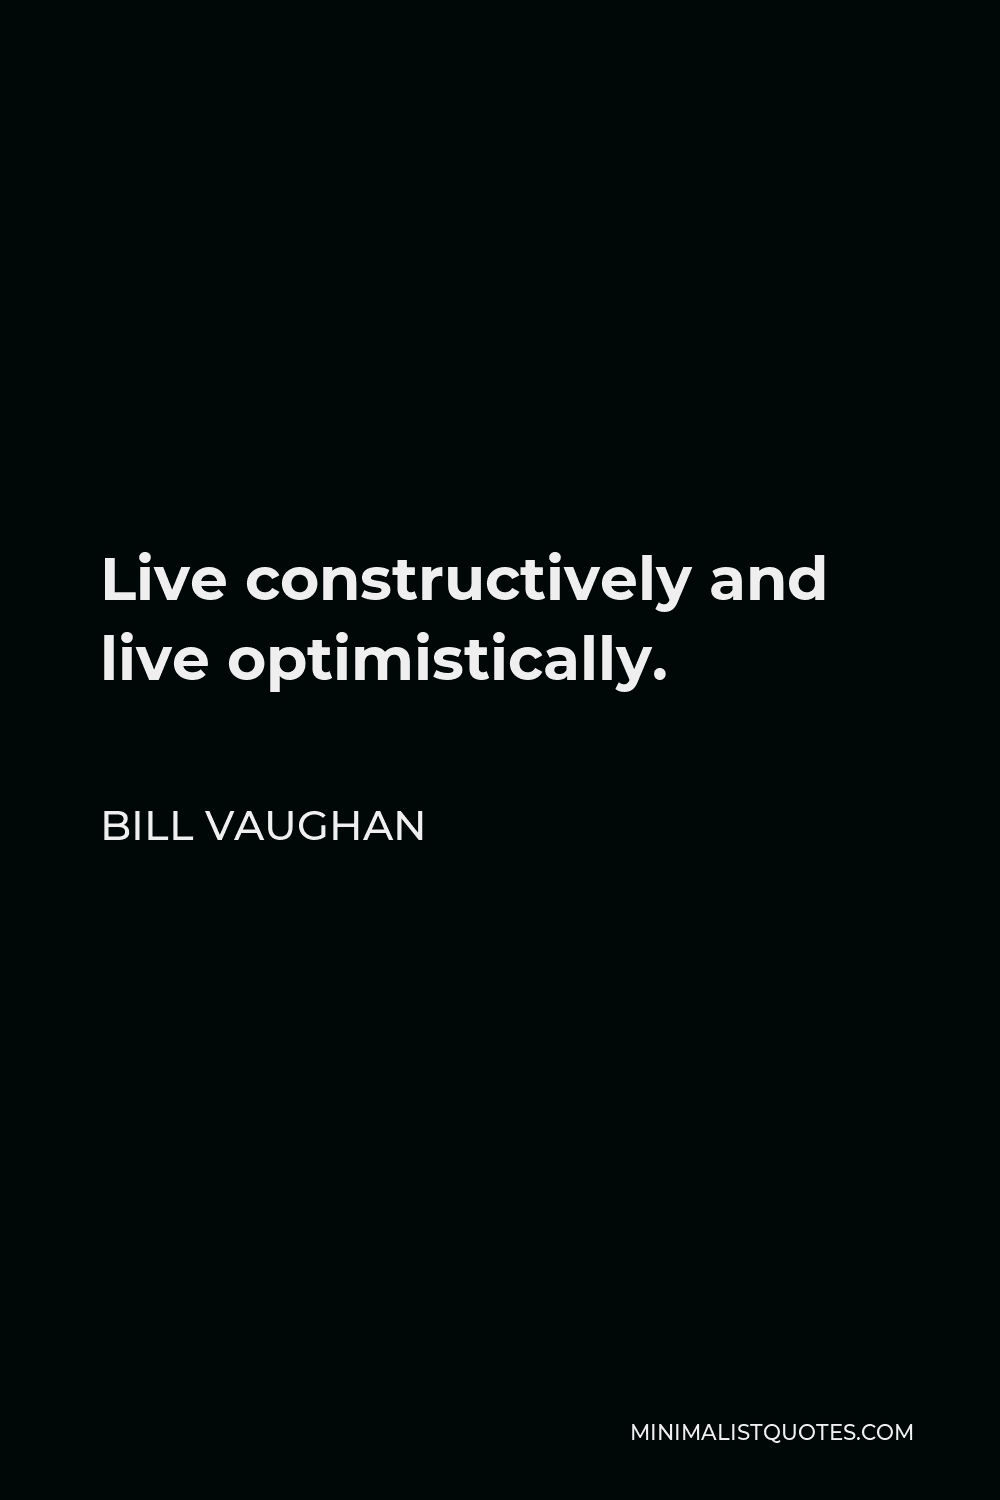 Bill Vaughan Quote - Live constructively and live optimistically.